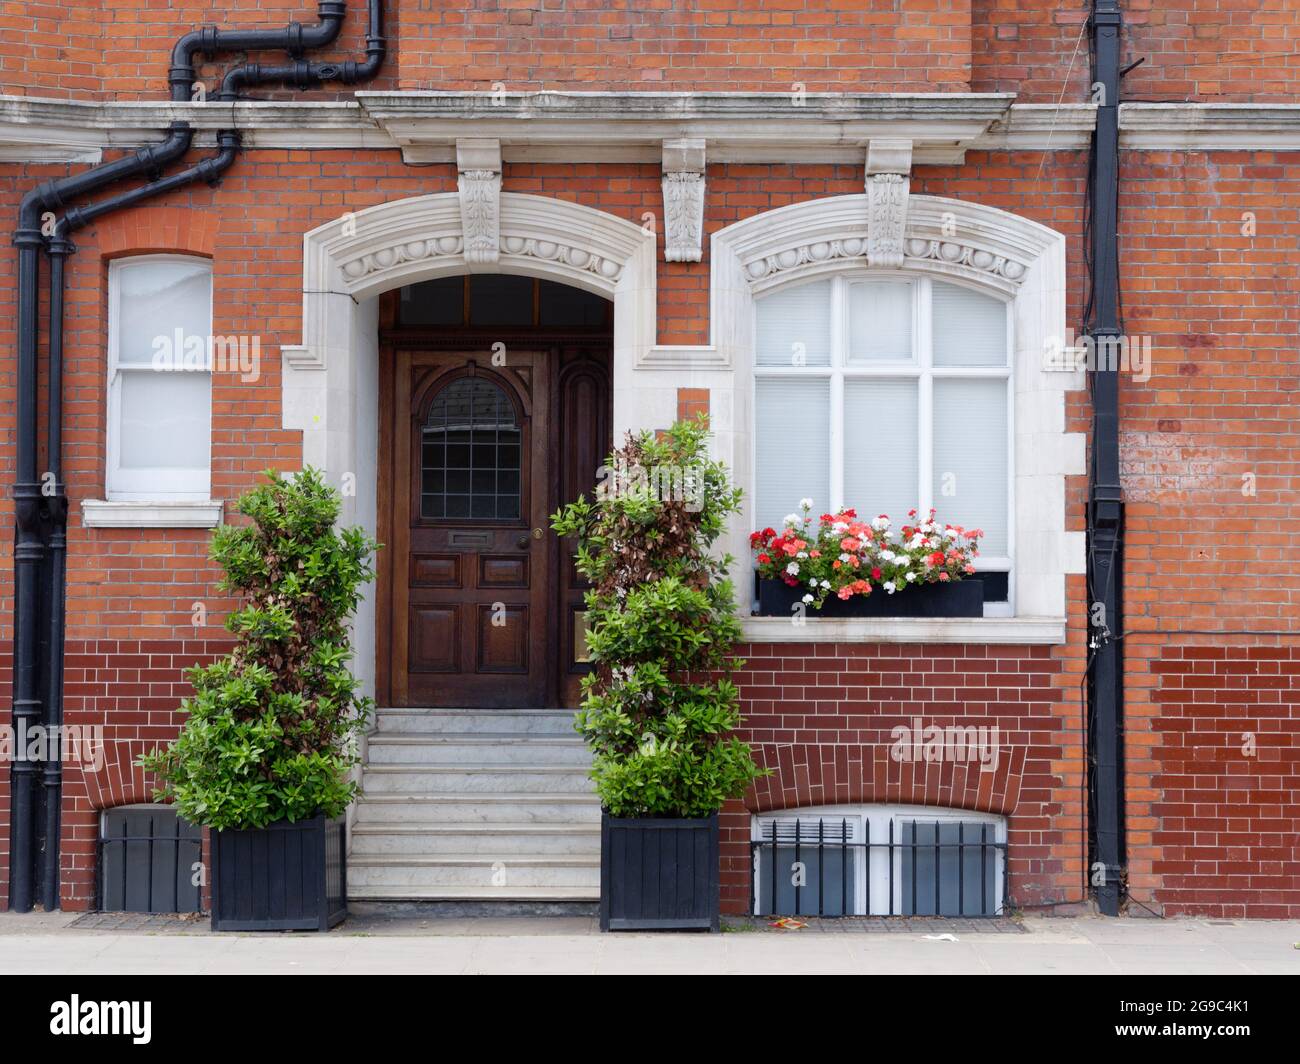 London, Greater London, England, June 12 2021: Residential brick built property with a steps leading to a brown front door. Stock Photo